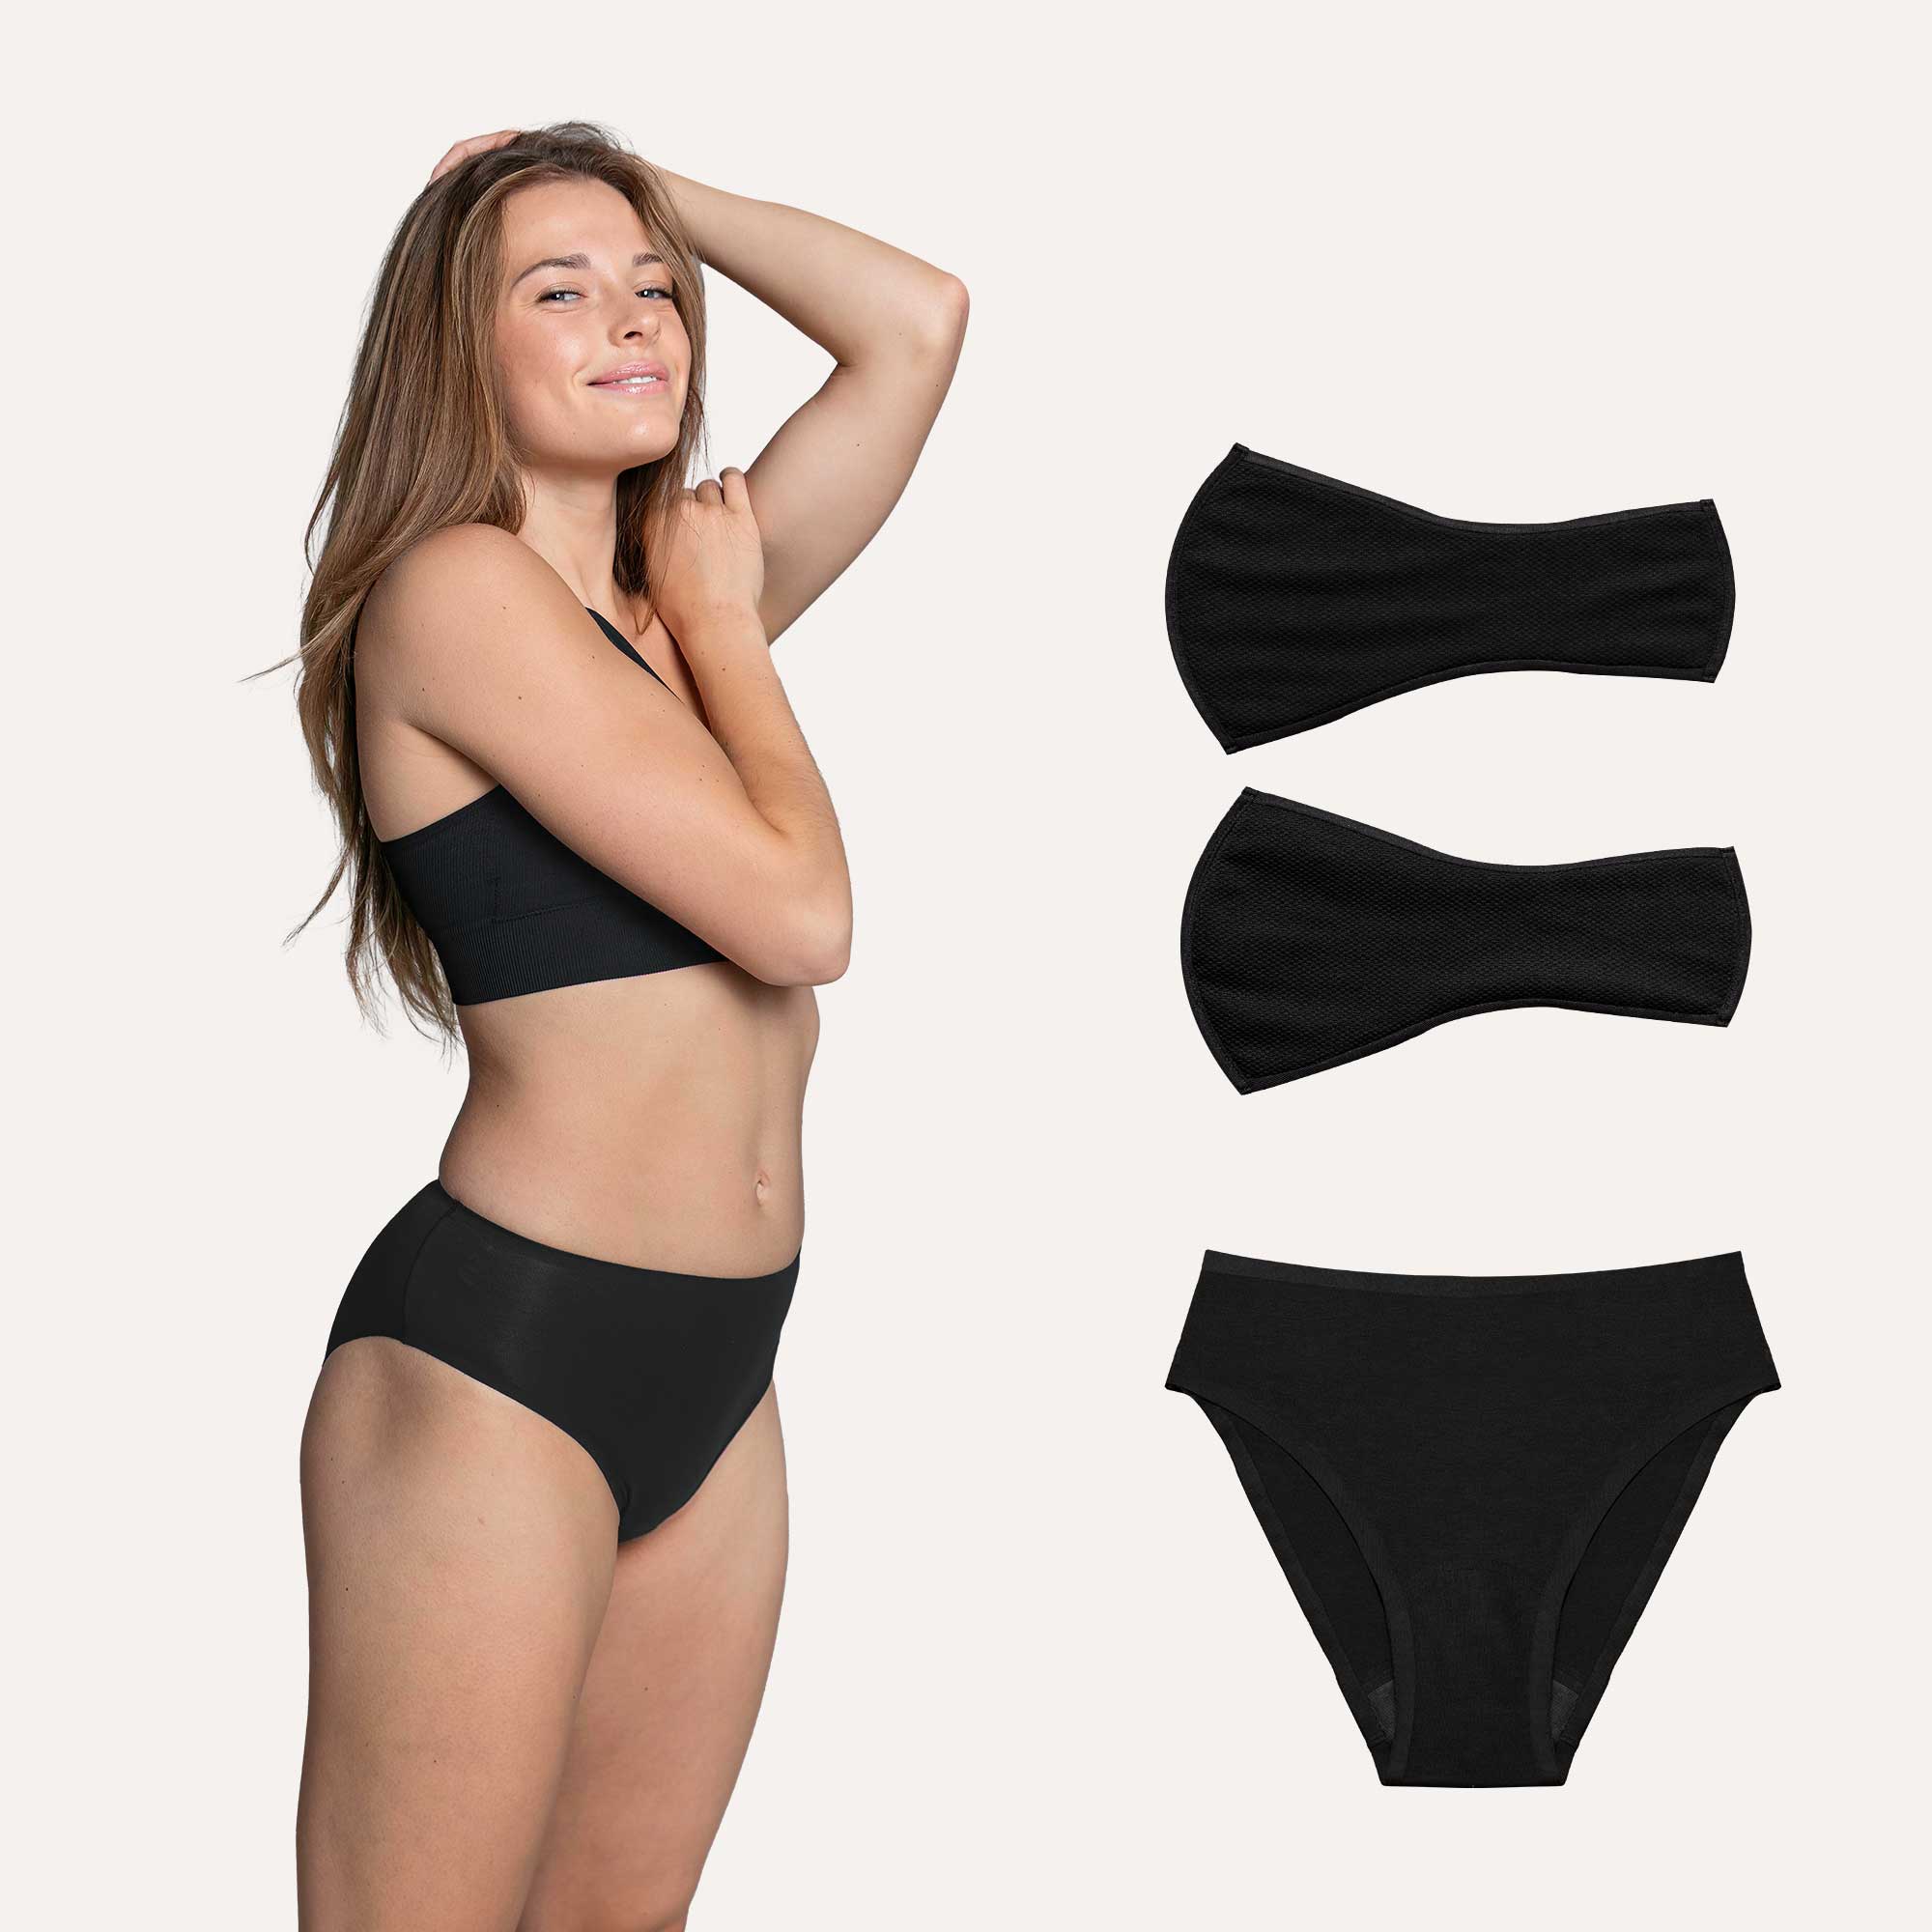 Easy Comfort period set (basic briefs incl. 2 pads)